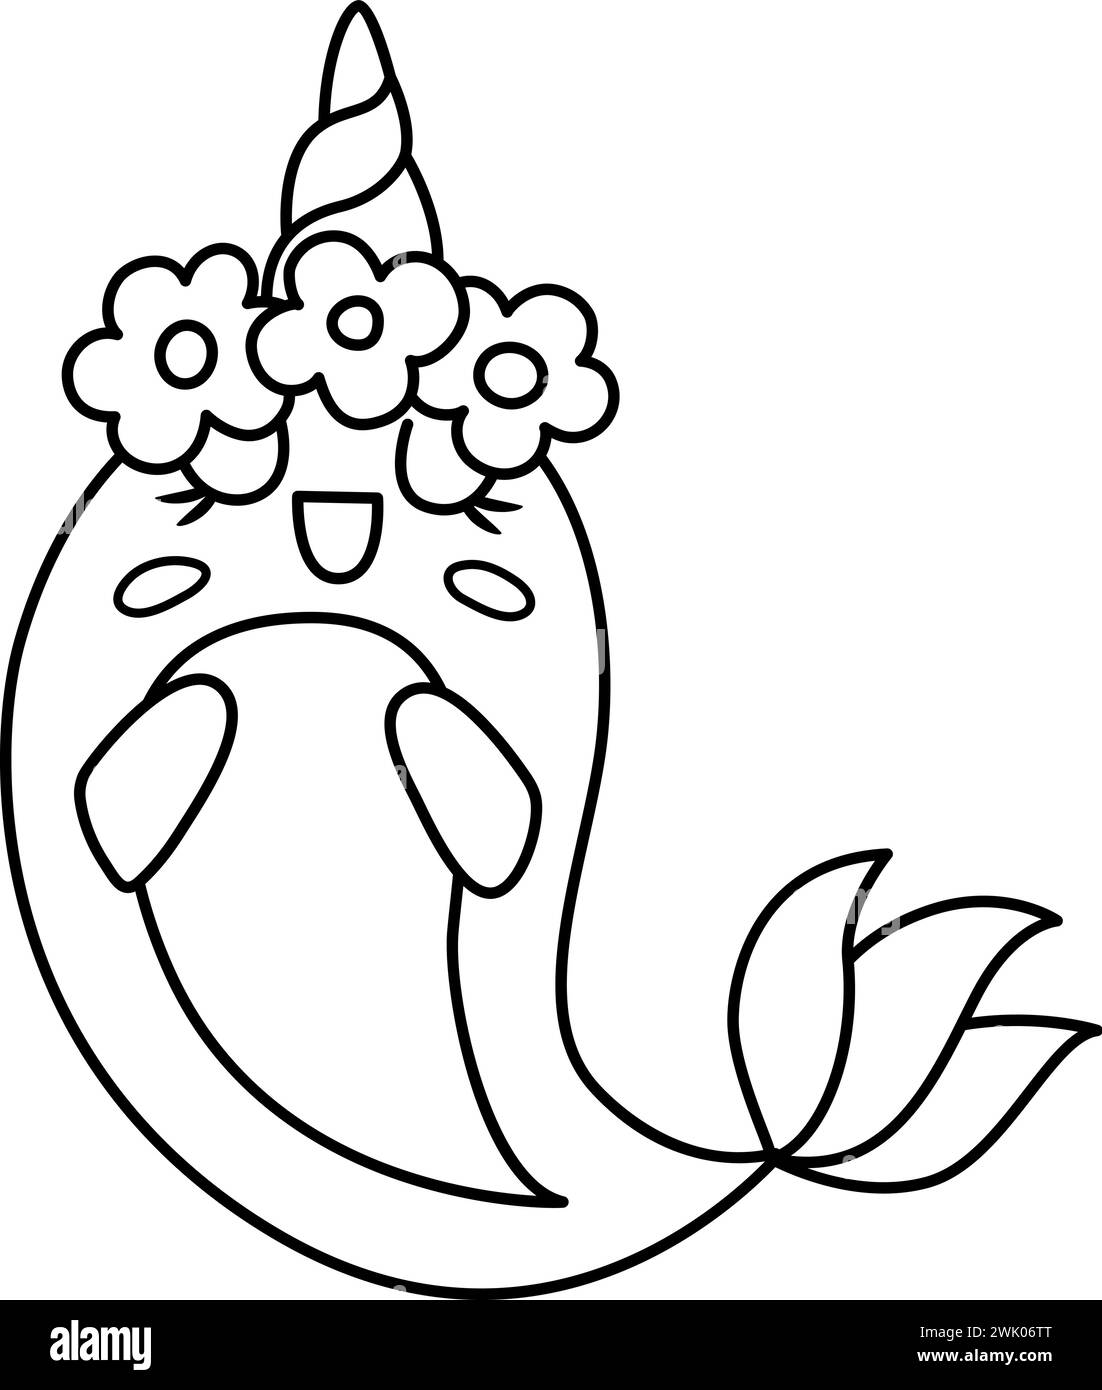 Vector black and white happy narval unicorn. Fantasy line water animal with rainbow horn, tail, flowers on head, wings, stars. Fairytale character for Stock Vector